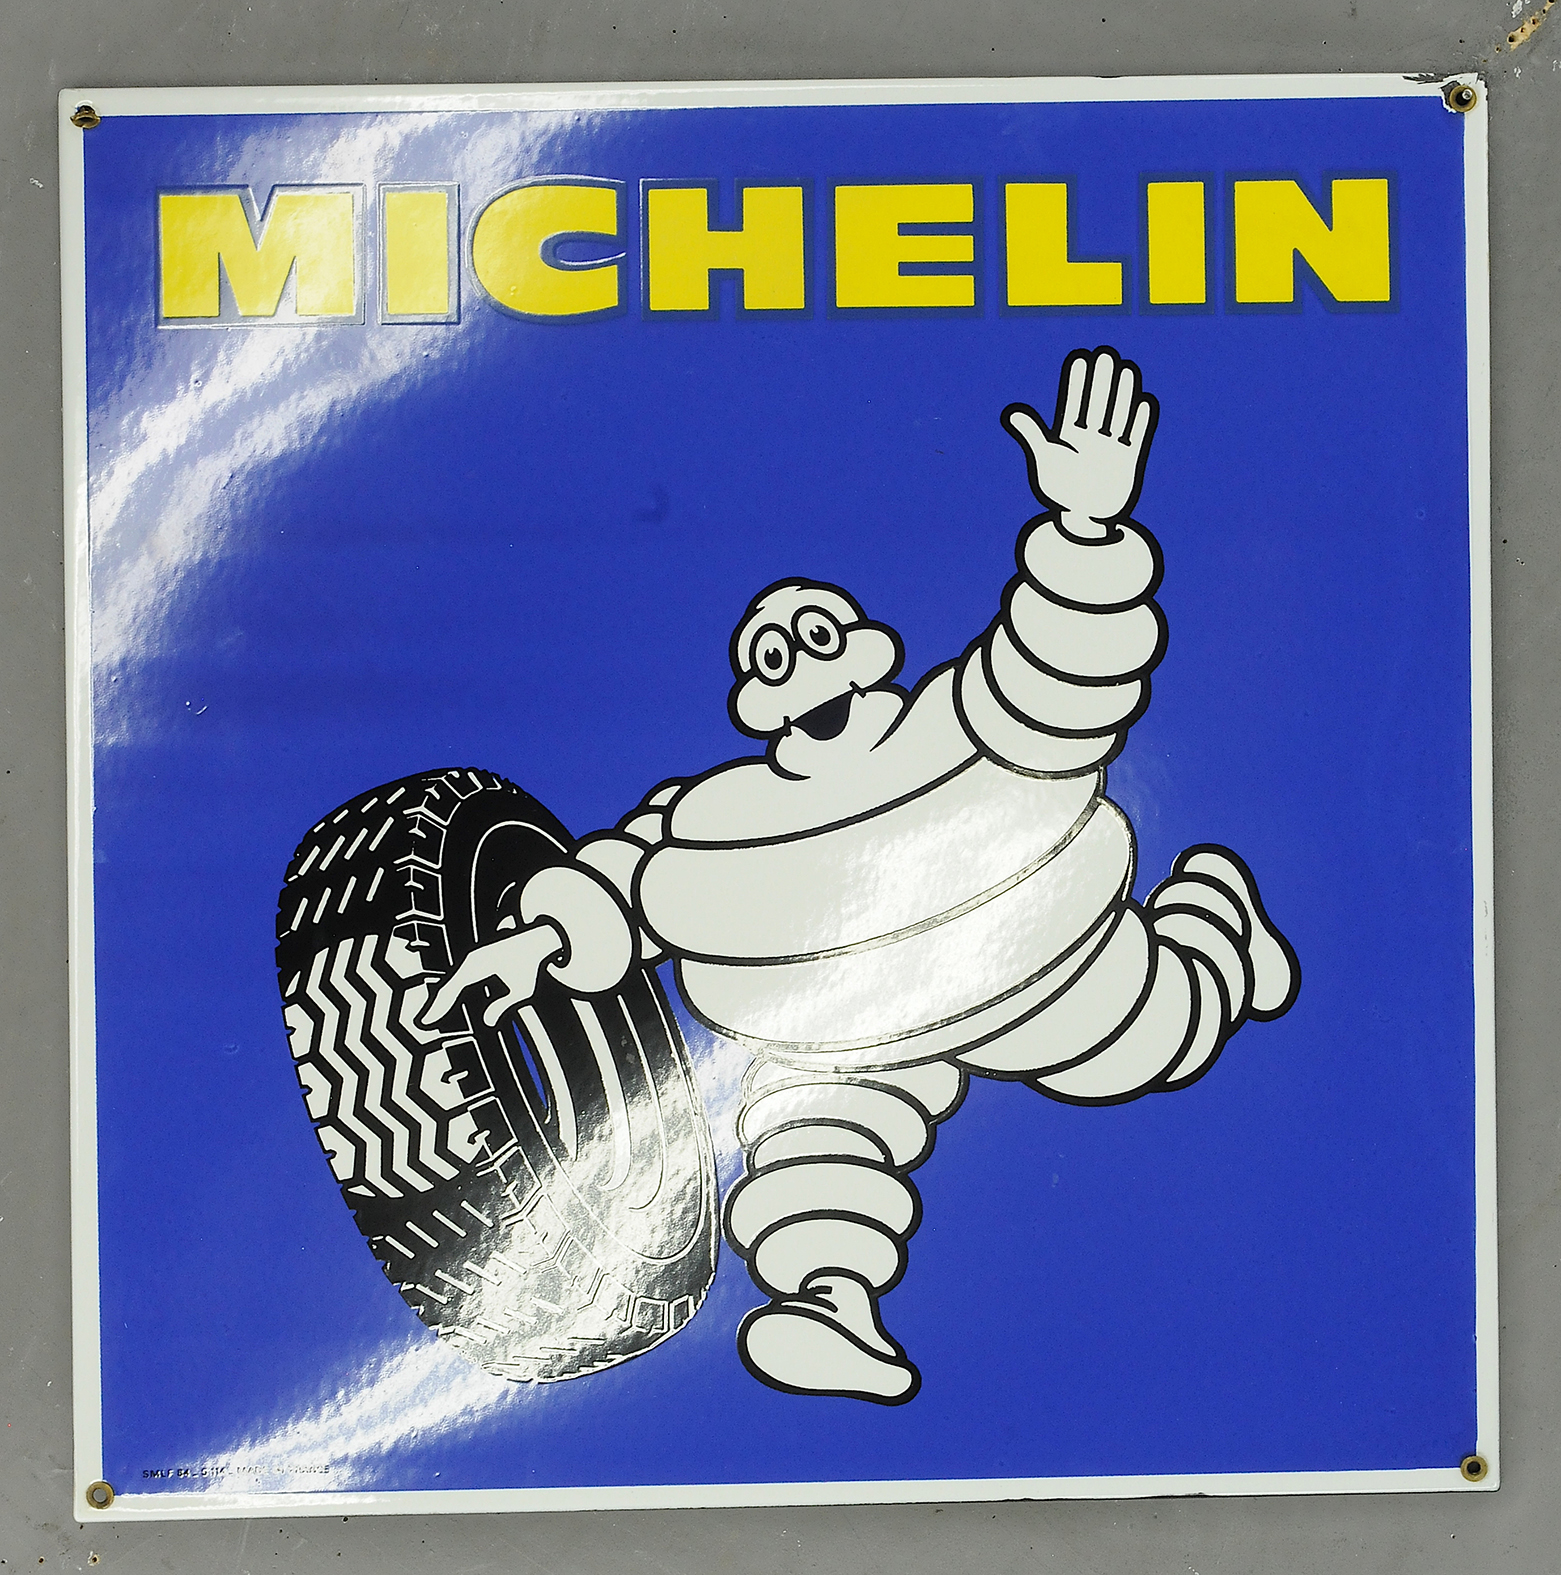 Michelin - Image 3 of 3